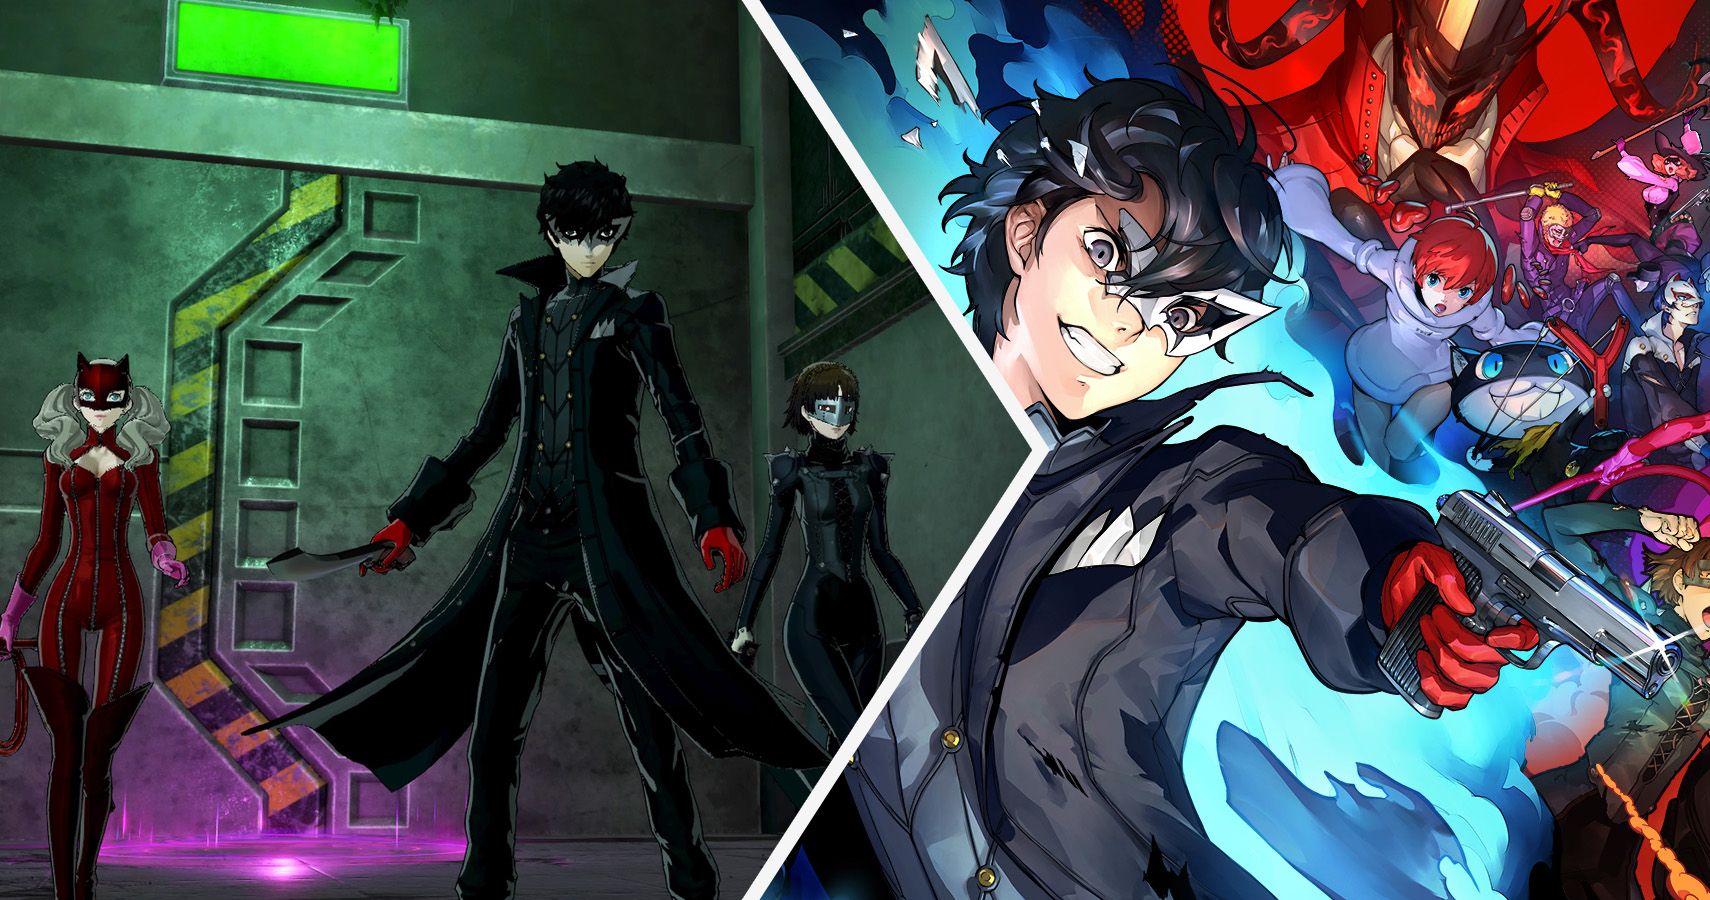 Persona 5 Strikers collage